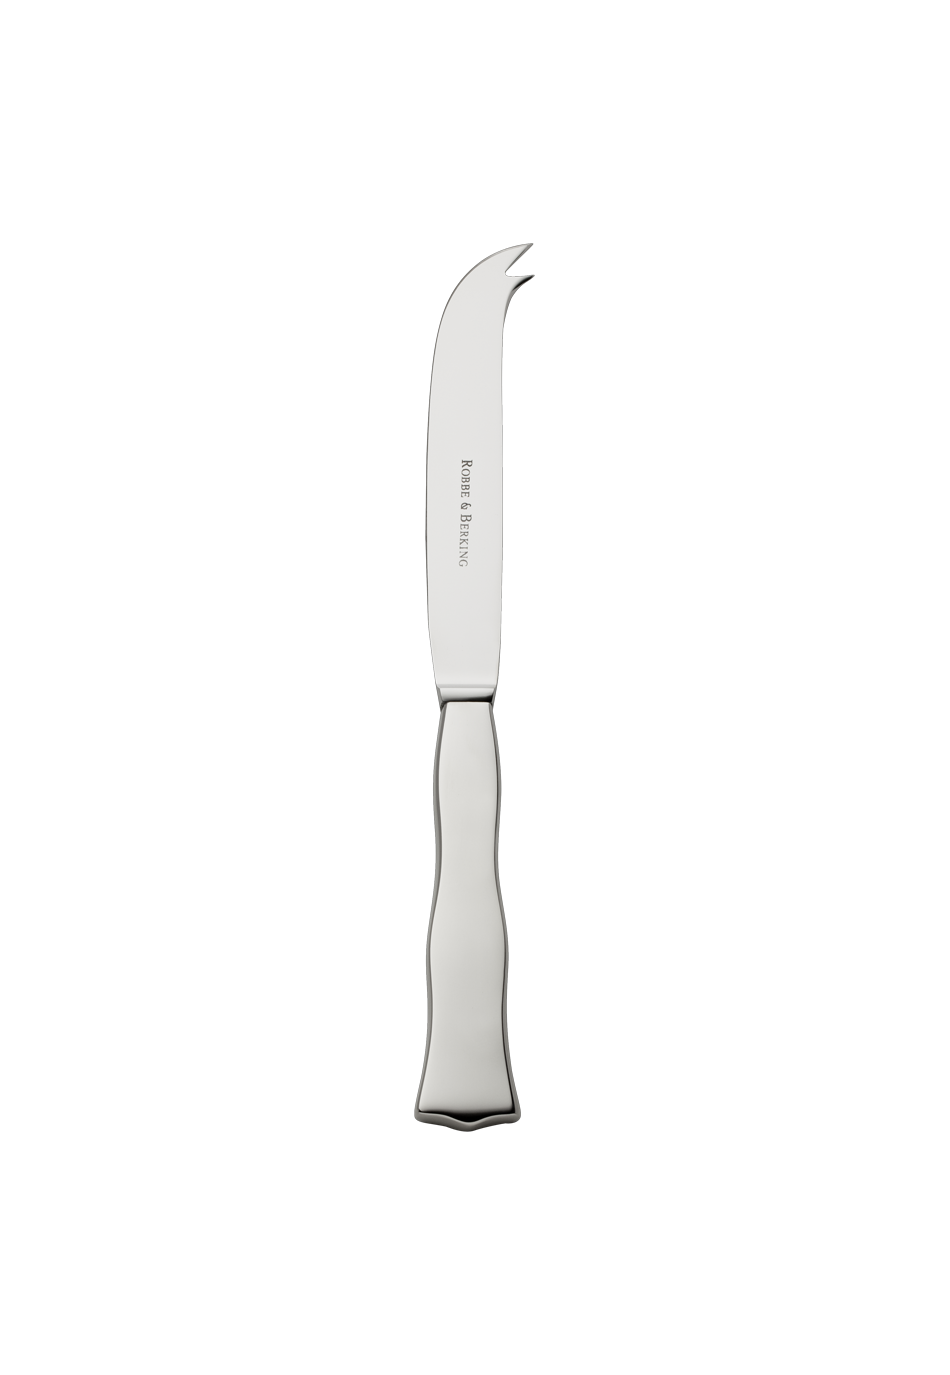 Lago Cheese Knife (18/8 stainless steel)